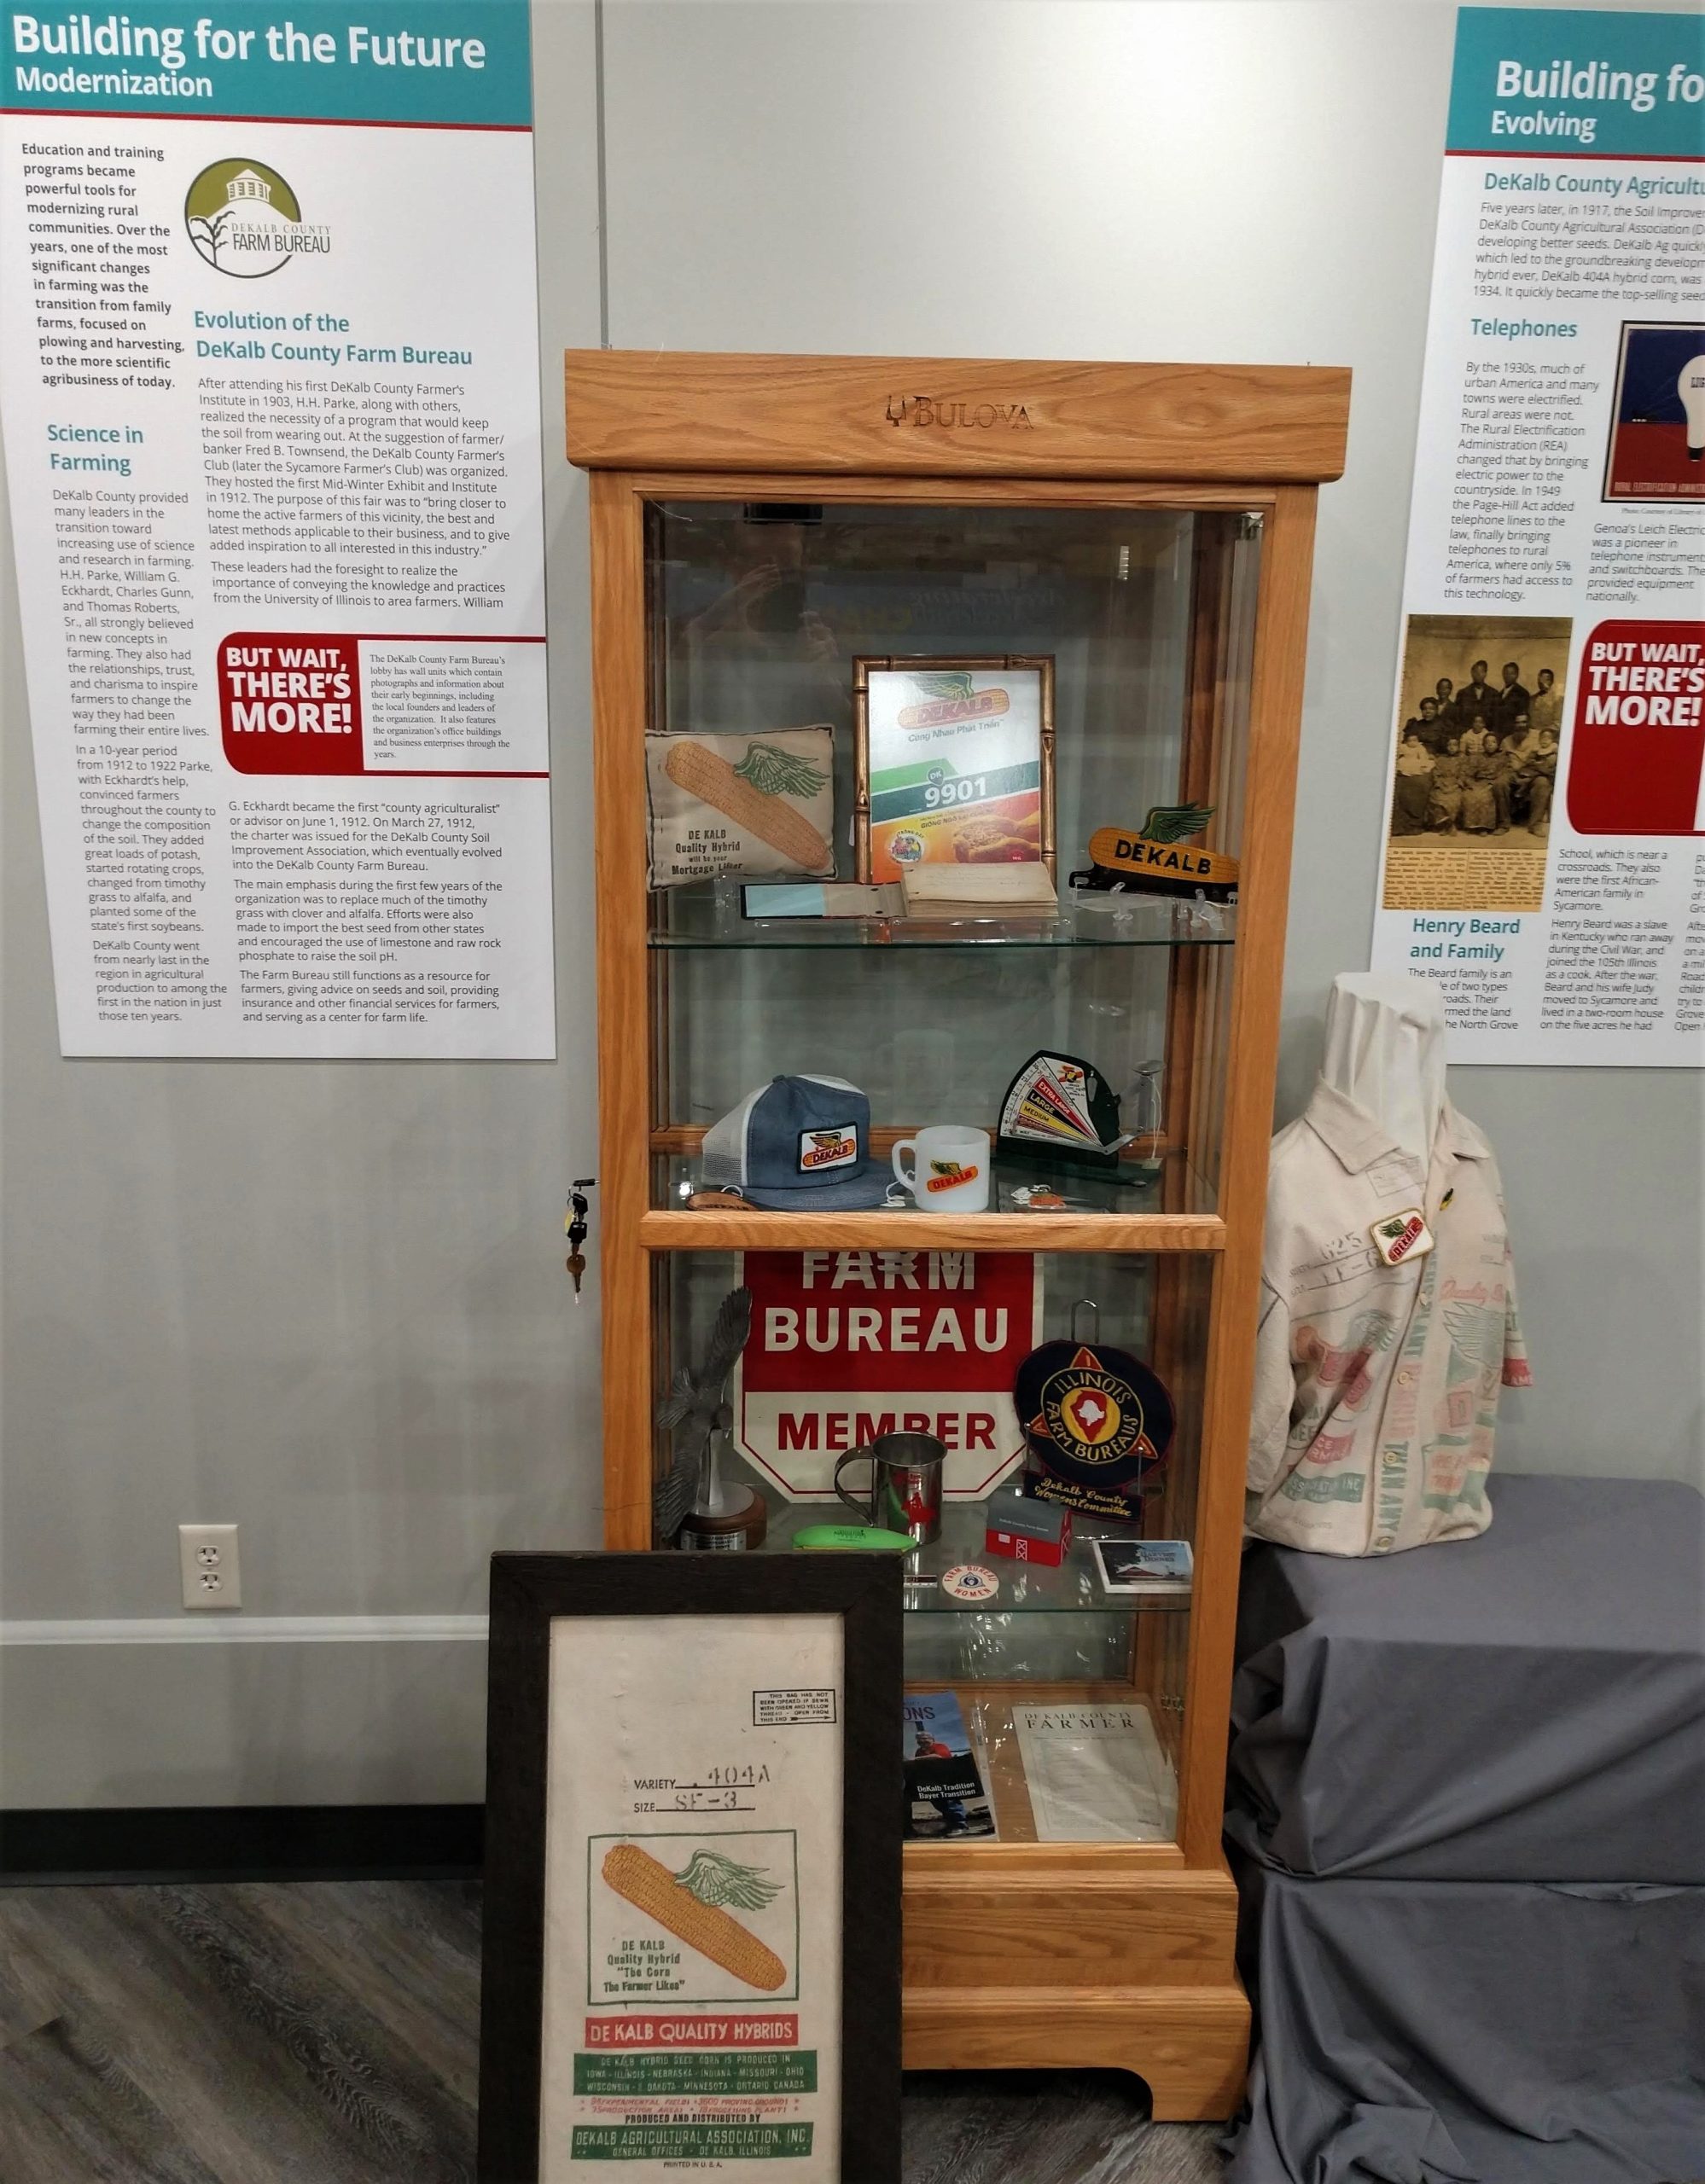 Photograph of a segment of DeKalb County History Center's companion exhibition featuring DeKalb Ag-related memorabilia and information.